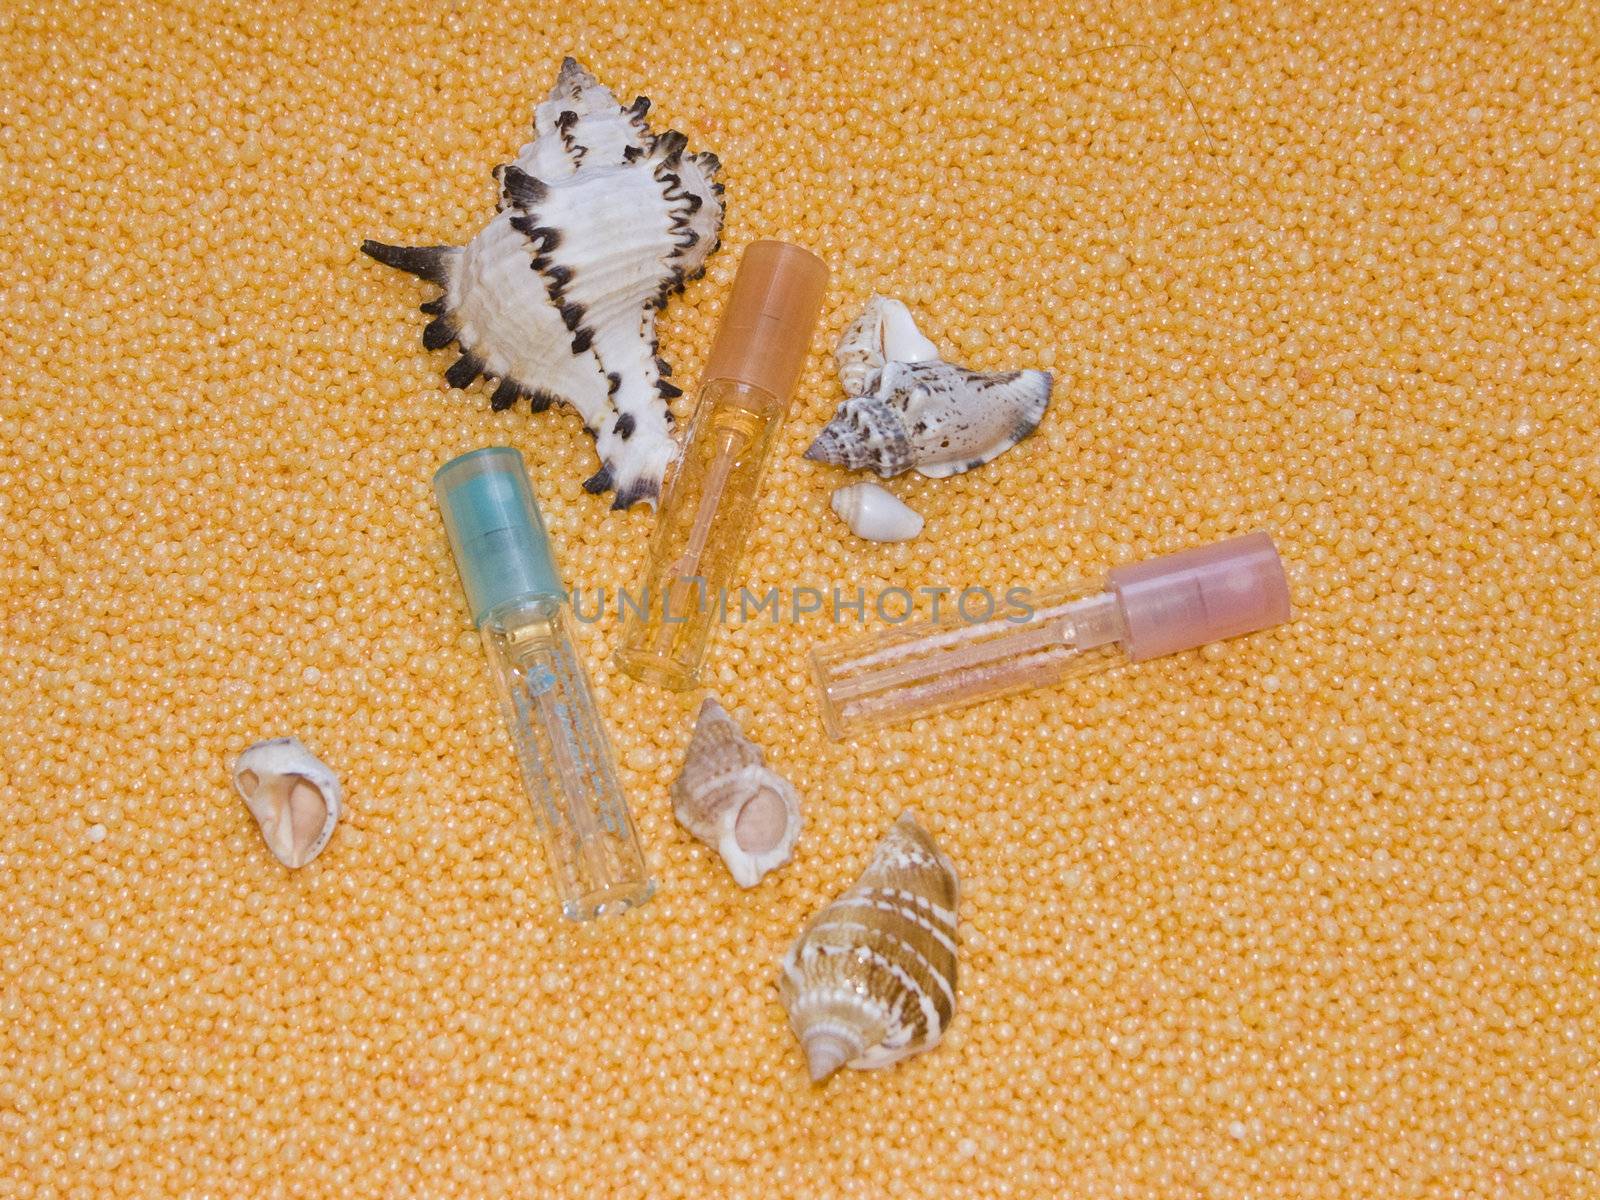 The image of bottles of perfume and cockleshells on a yellow background